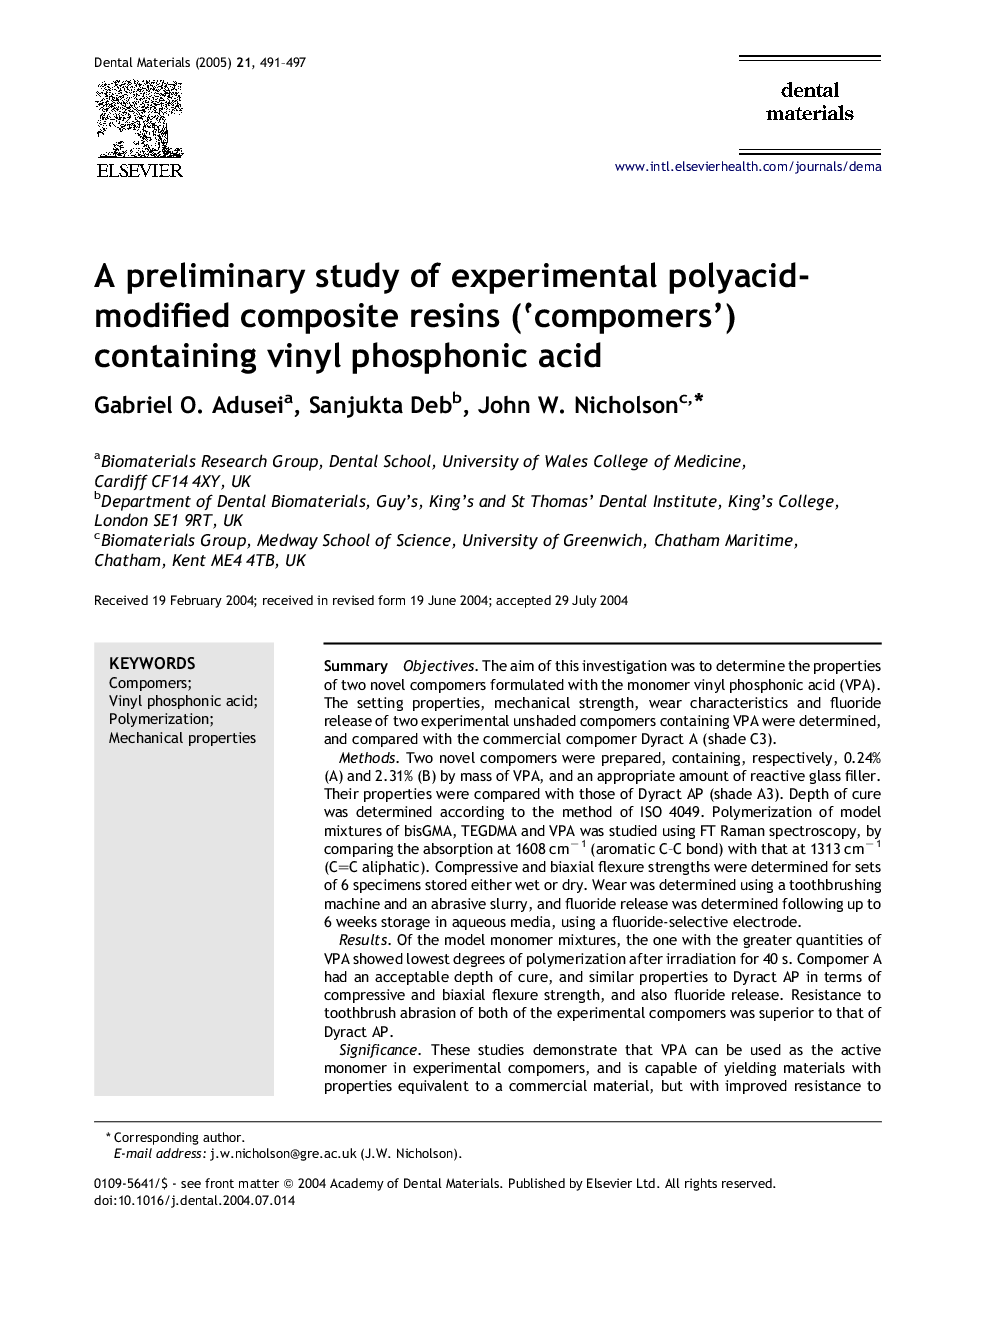 A preliminary study of experimental polyacid-modified composite resins ('compomers') containing vinyl phosphonic acid